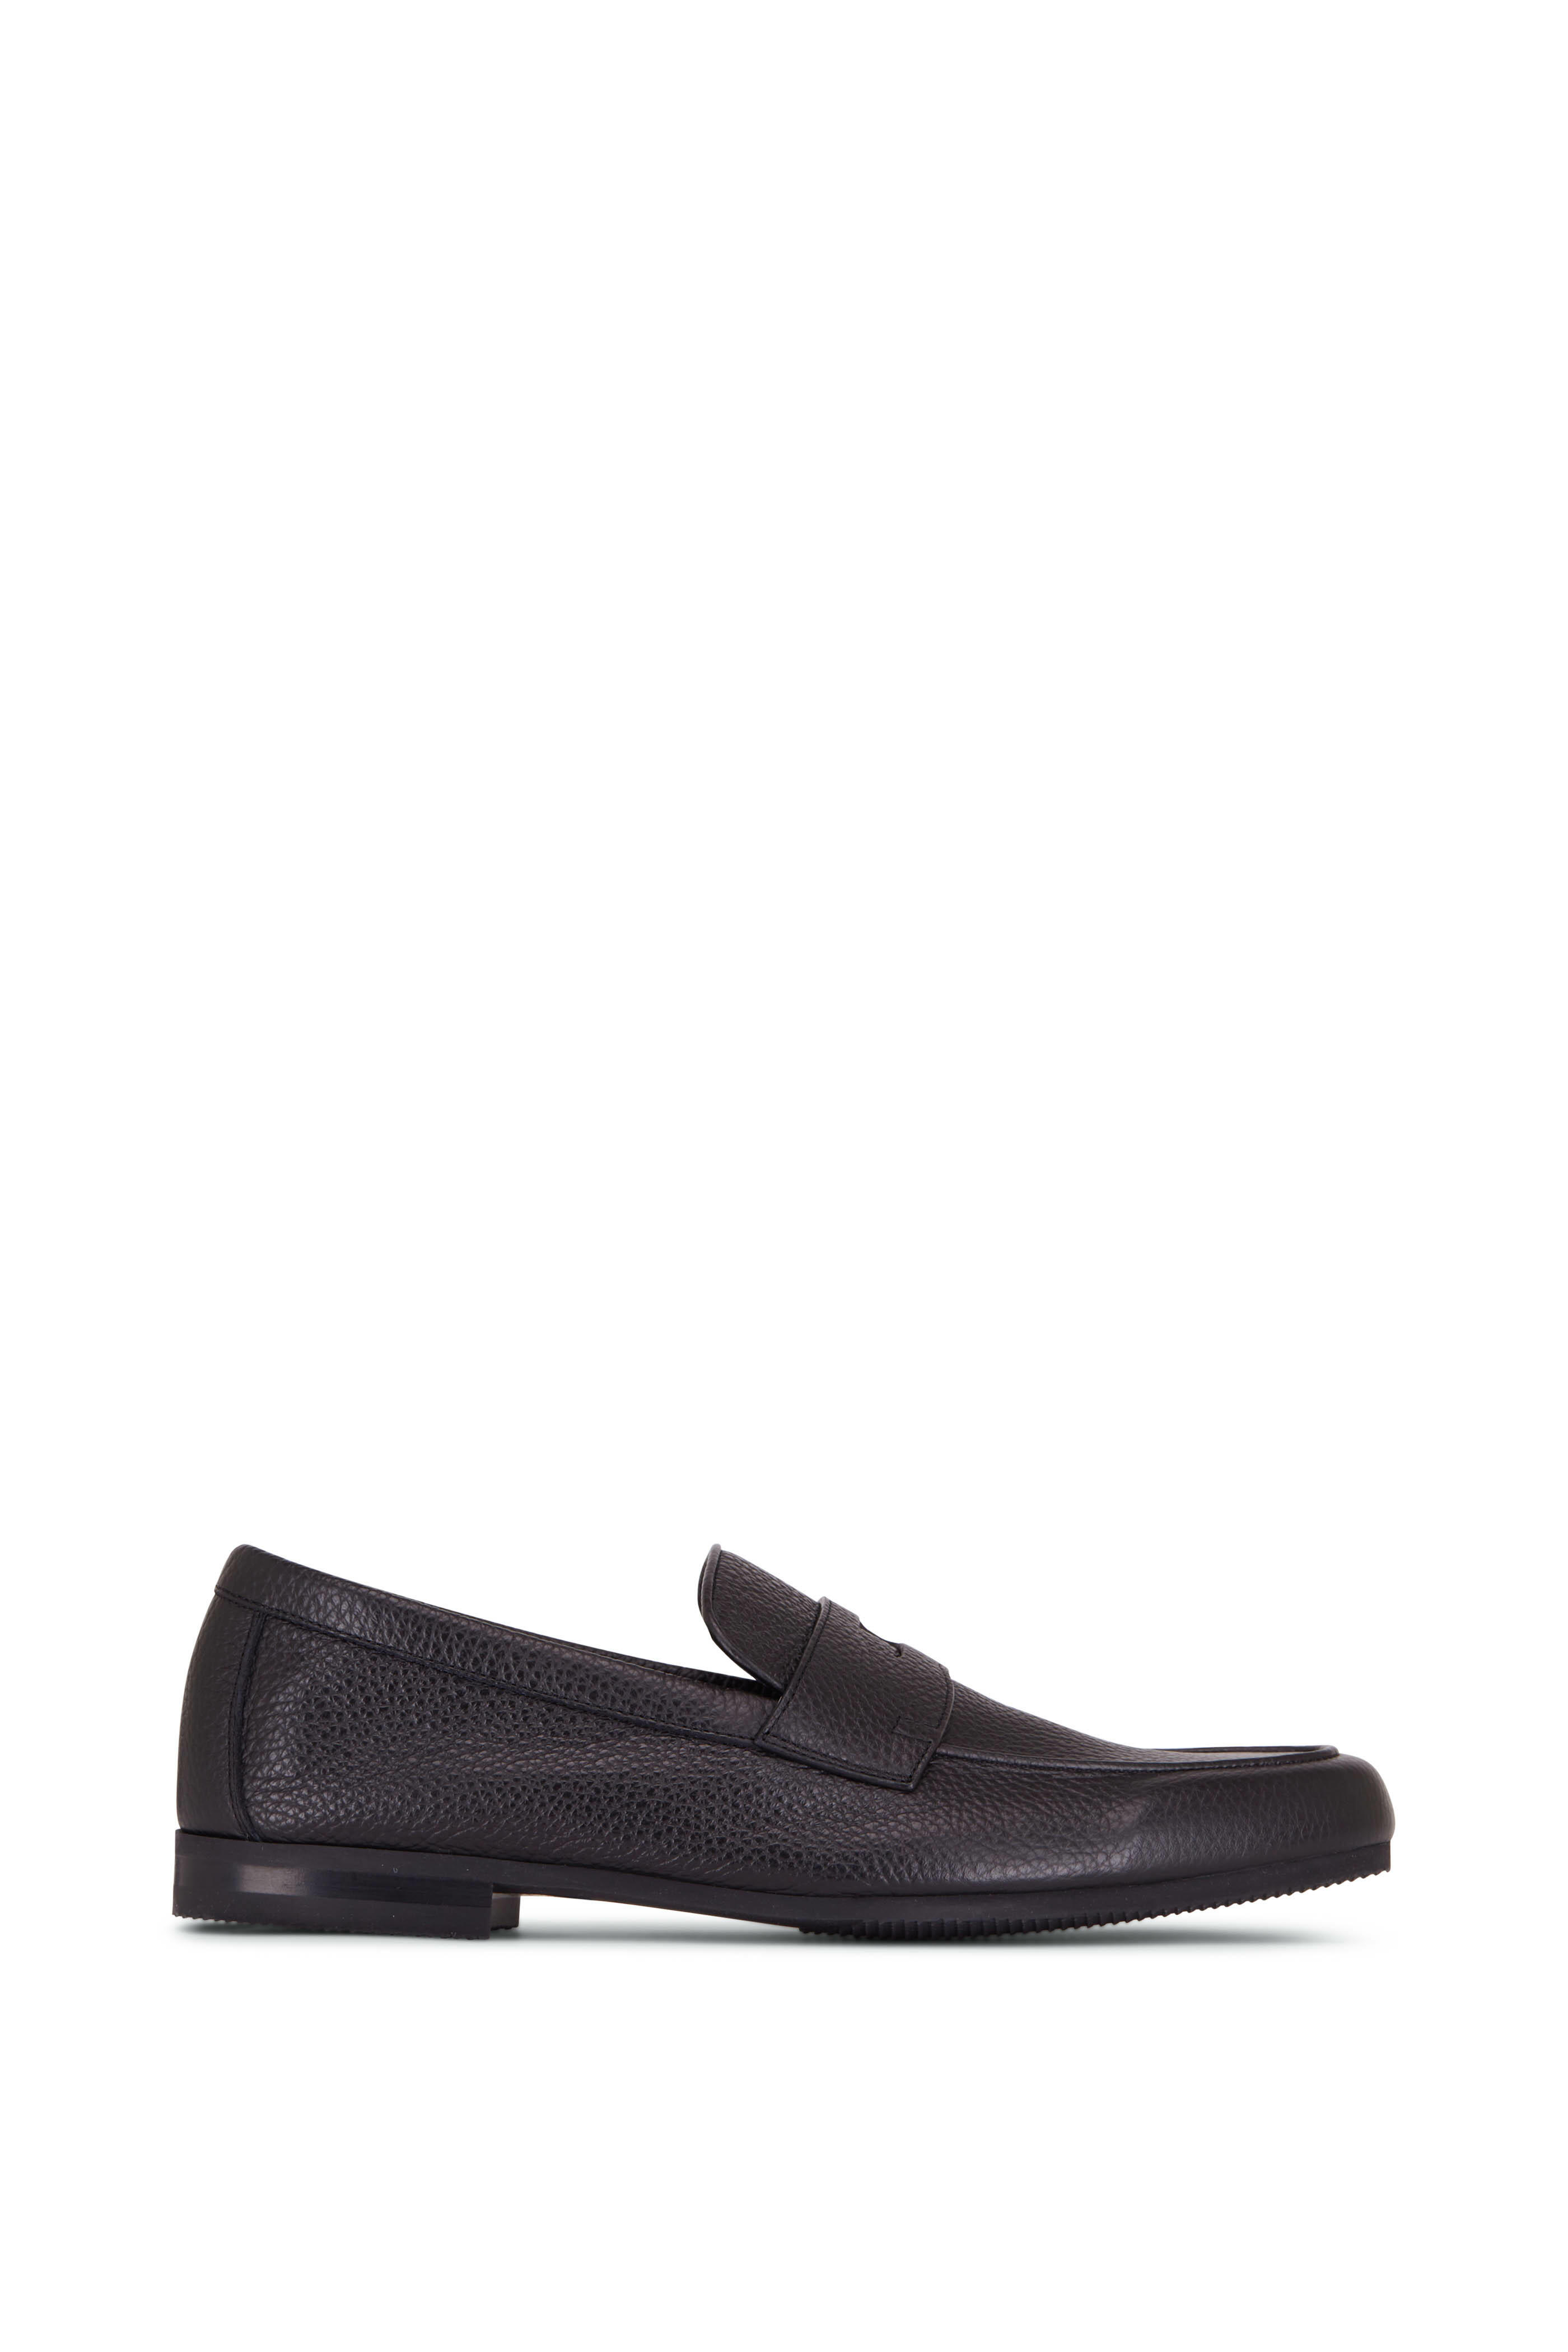 John Lobb - Black Grained Leather Penny Loafer | Mitchell Stores